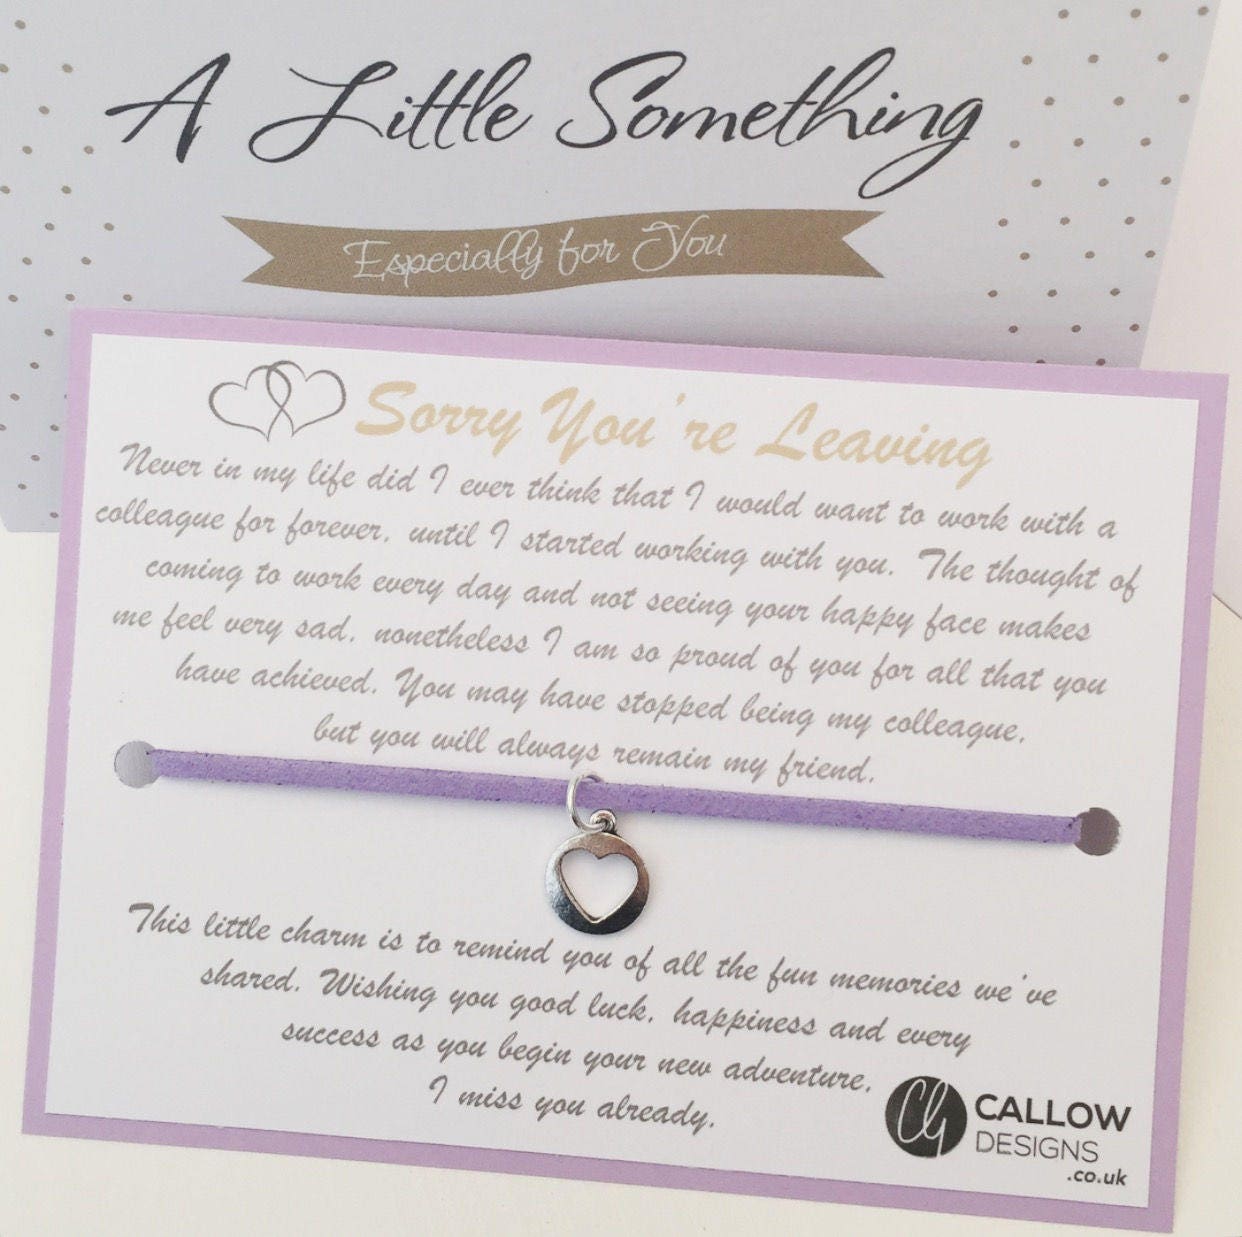 Sorry You re Leaving Colleague Work Friend Friendship Charm Bracelet Gift Meaning Quote Keepsake Silver Callow Designs Good Luck New Job